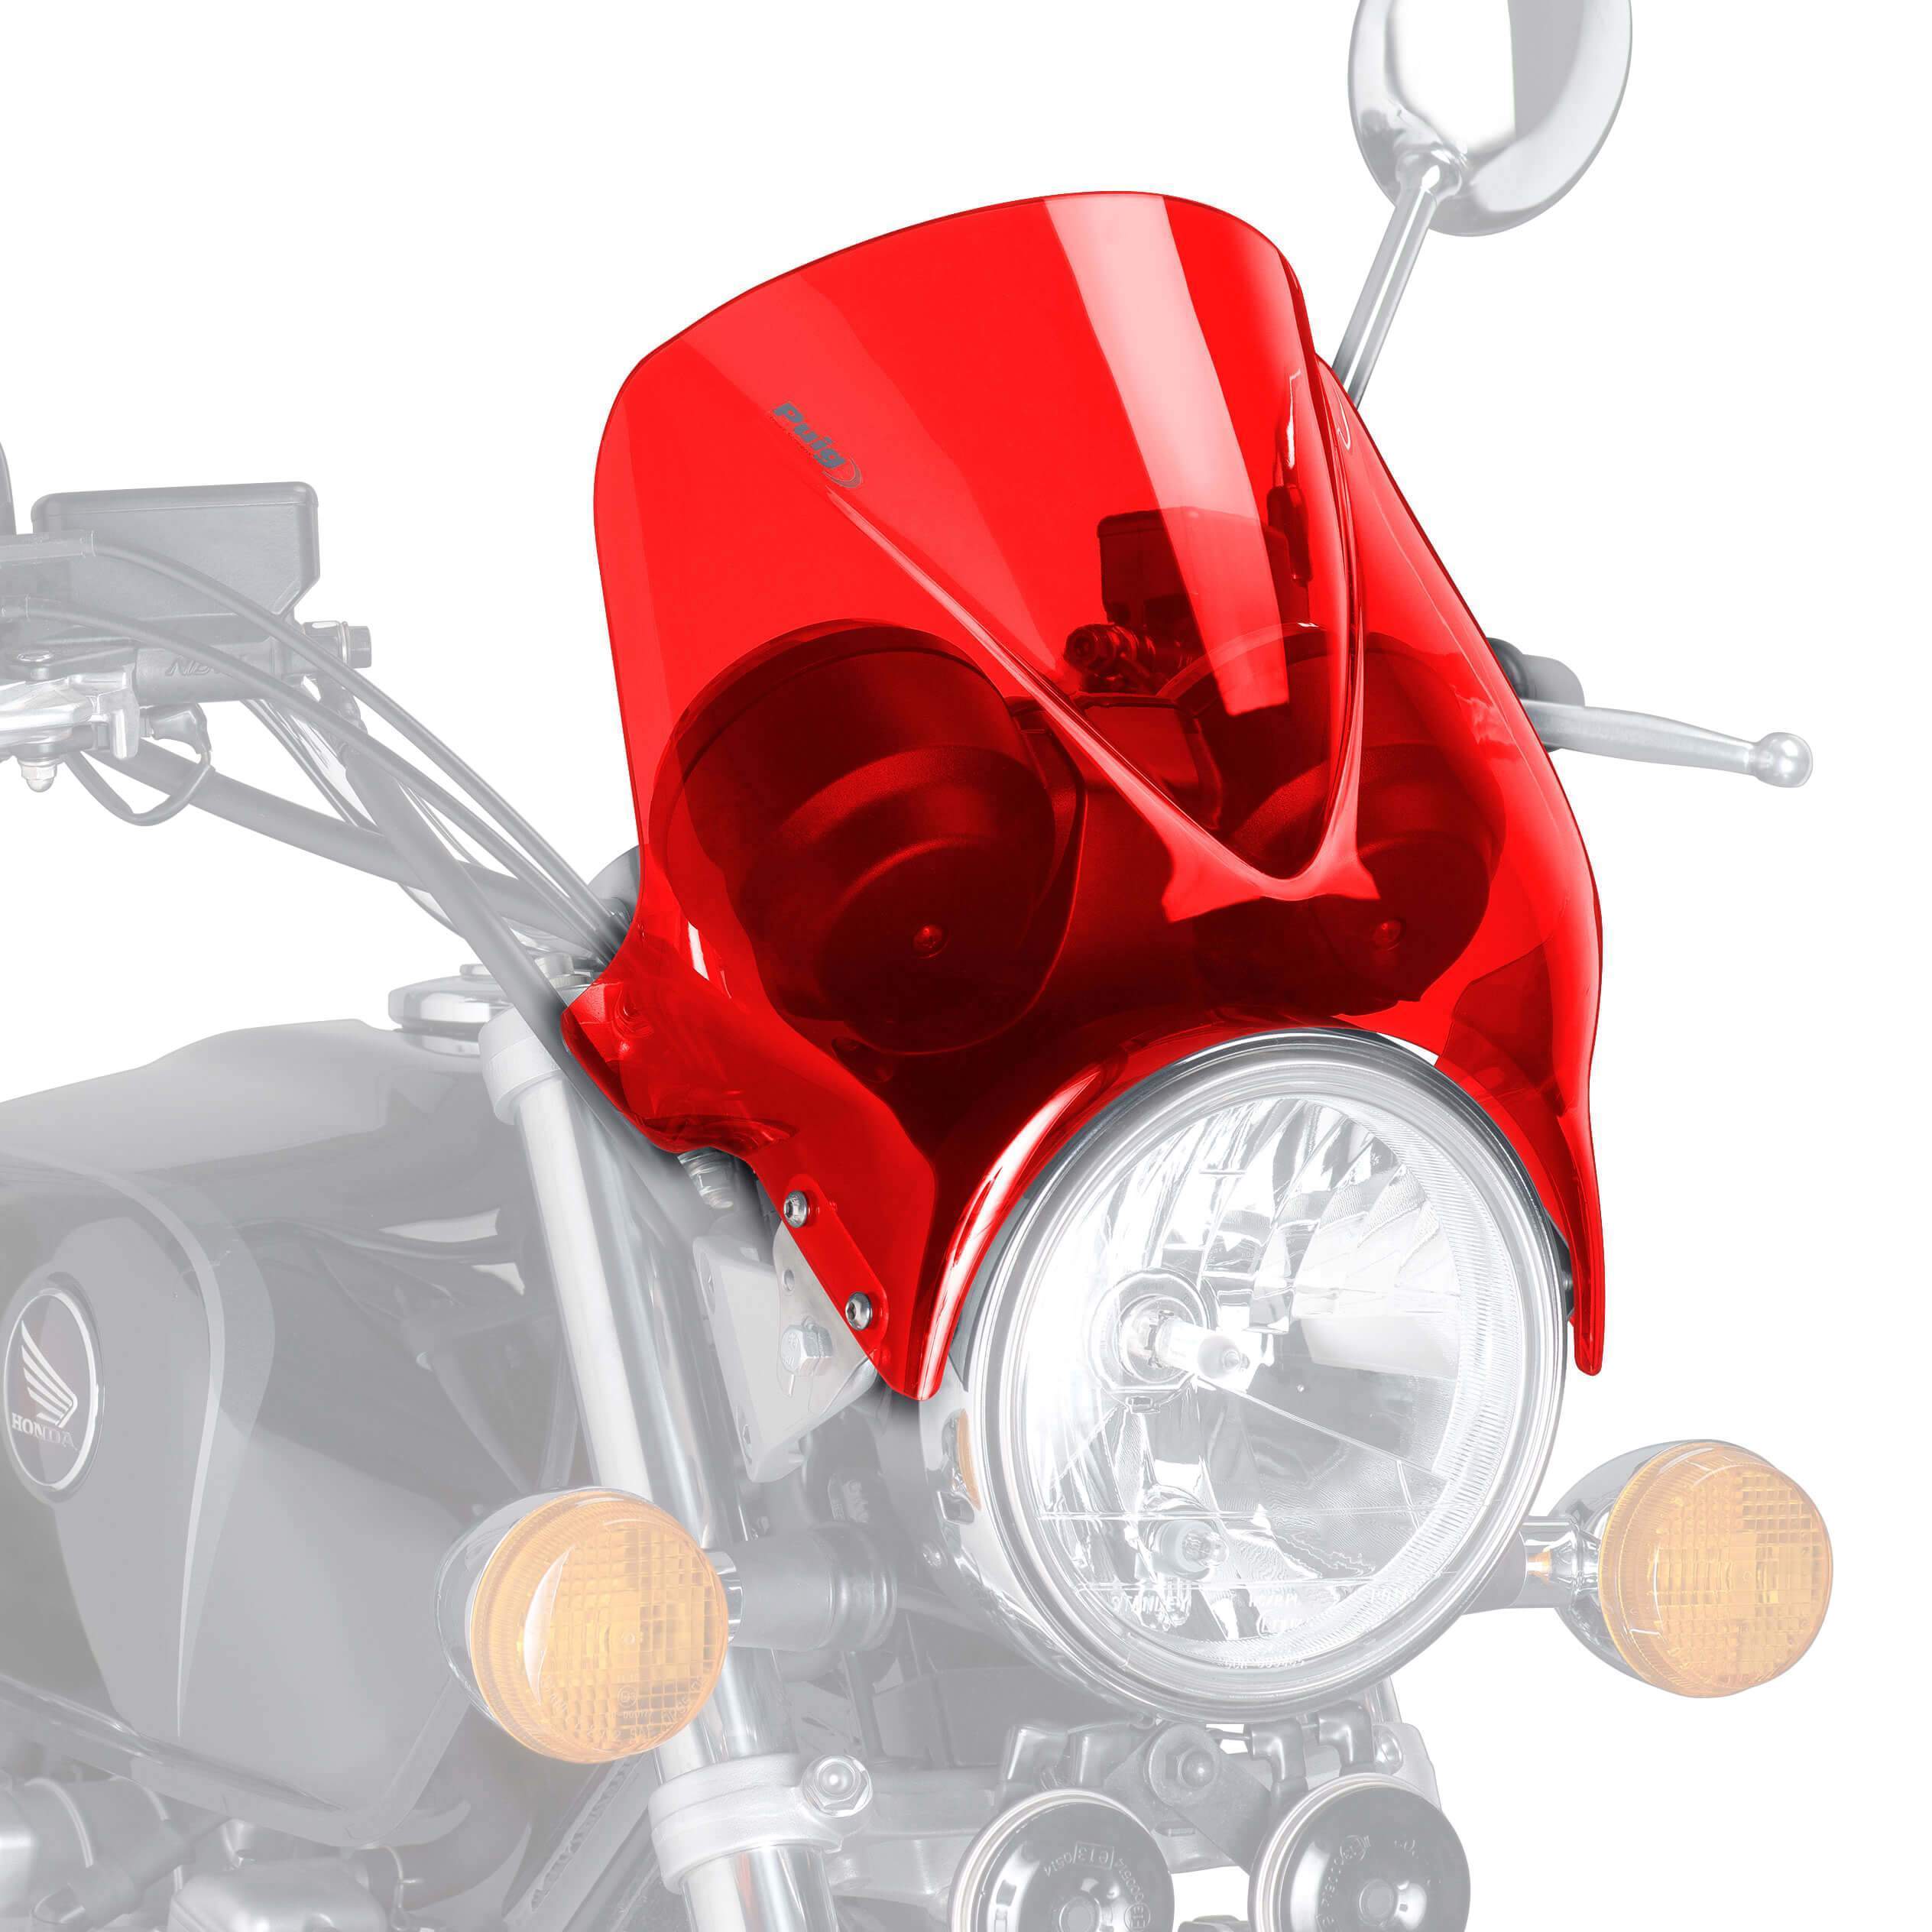 Puig Windy Screen | Red | Cagiva Planet 125 1998>2003-M1482R-Screens-Pyramid Motorcycle Accessories